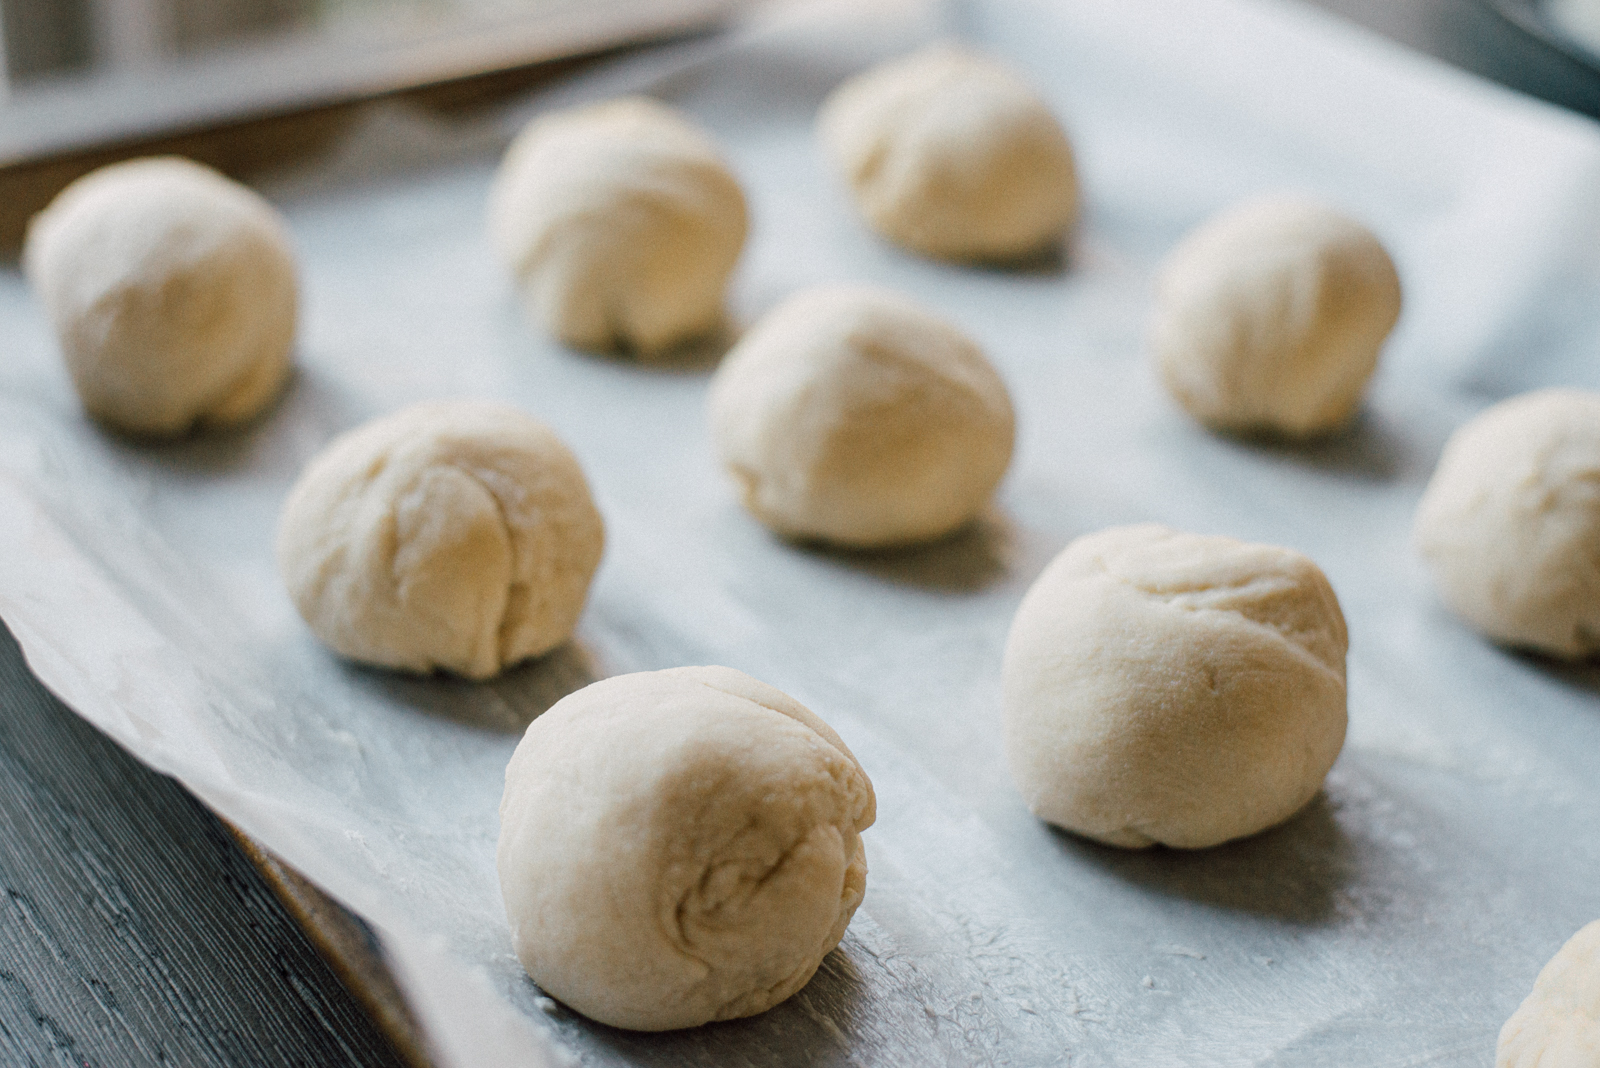 yeast dough parker house rolls in balls rising on parchment paper